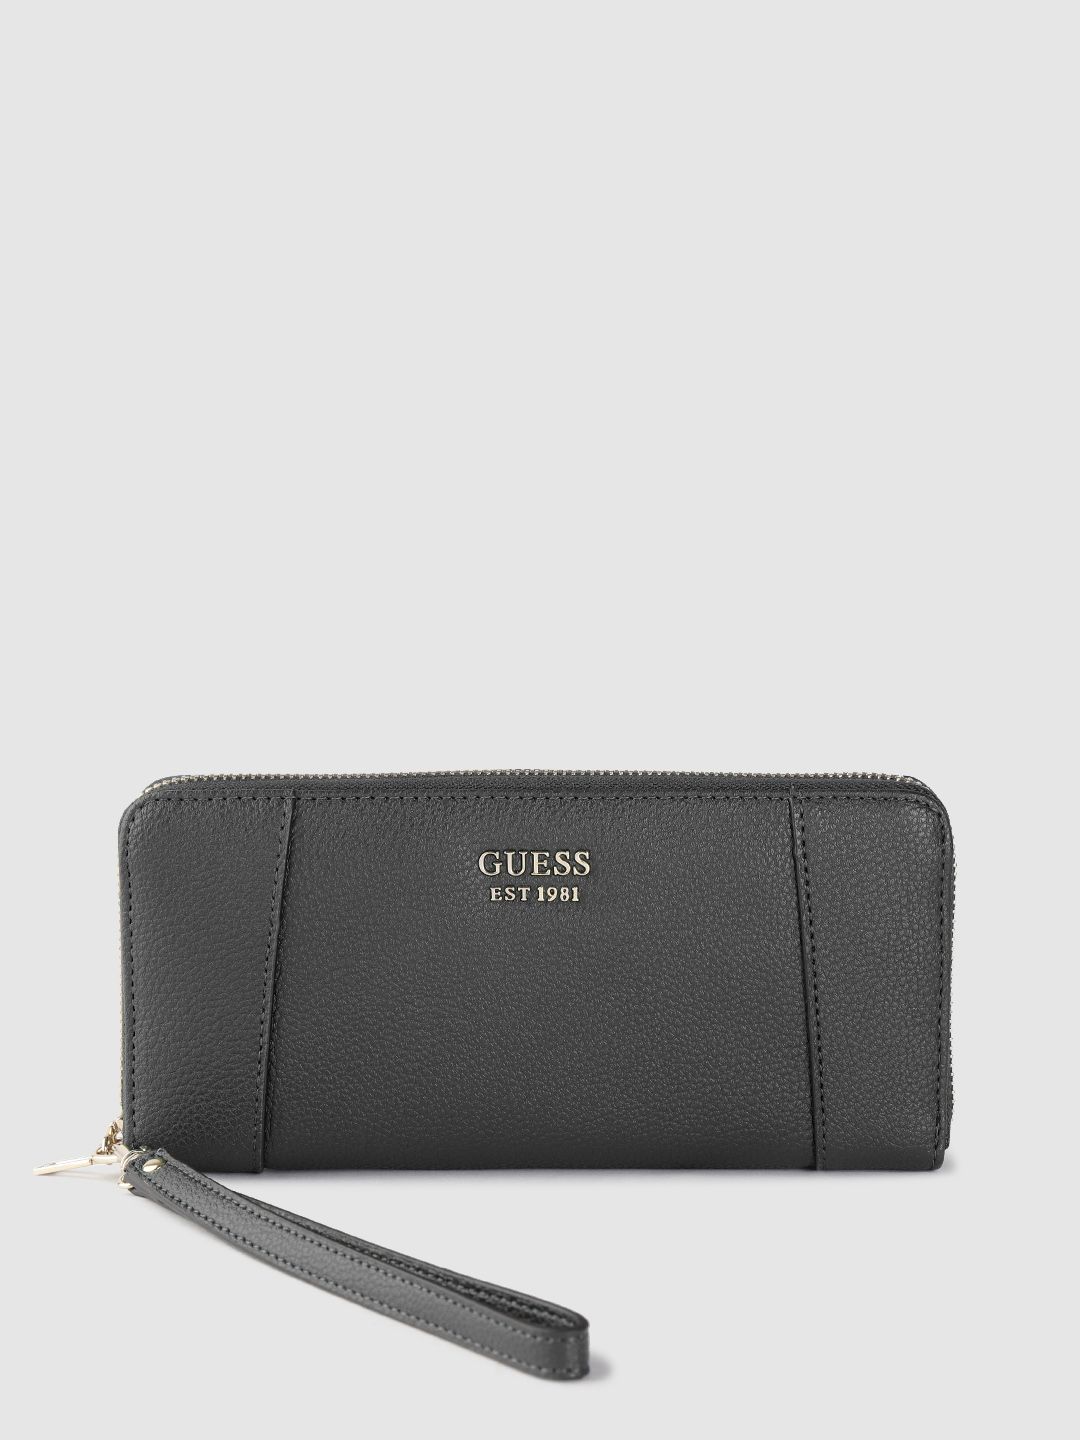 GUESS Women Black Solid Zip Around Wallet with Wrist loop Price in India